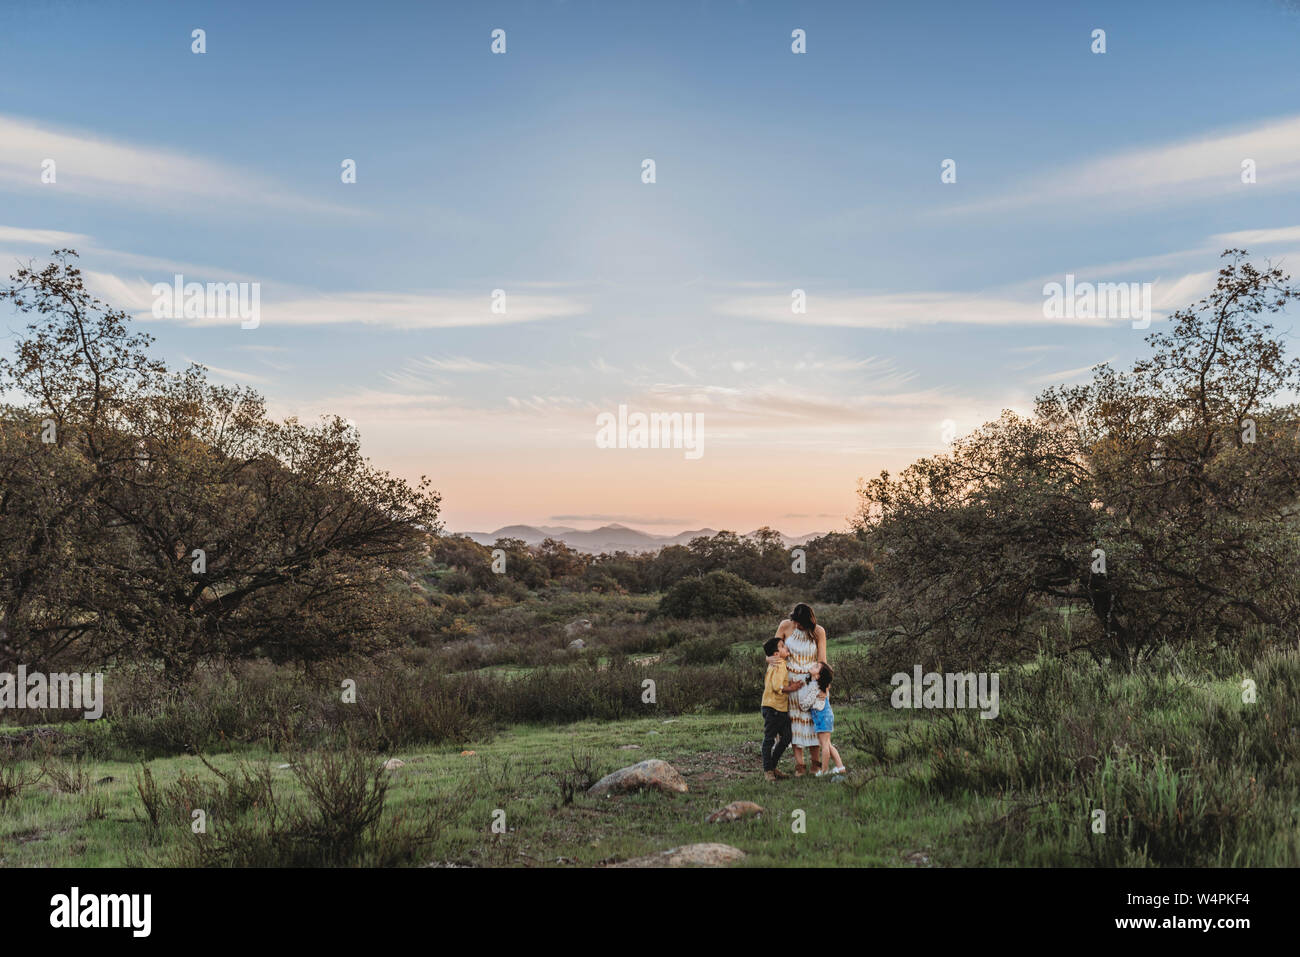 Landscape of young mother and children hugging under blue sky in field Stock Photo